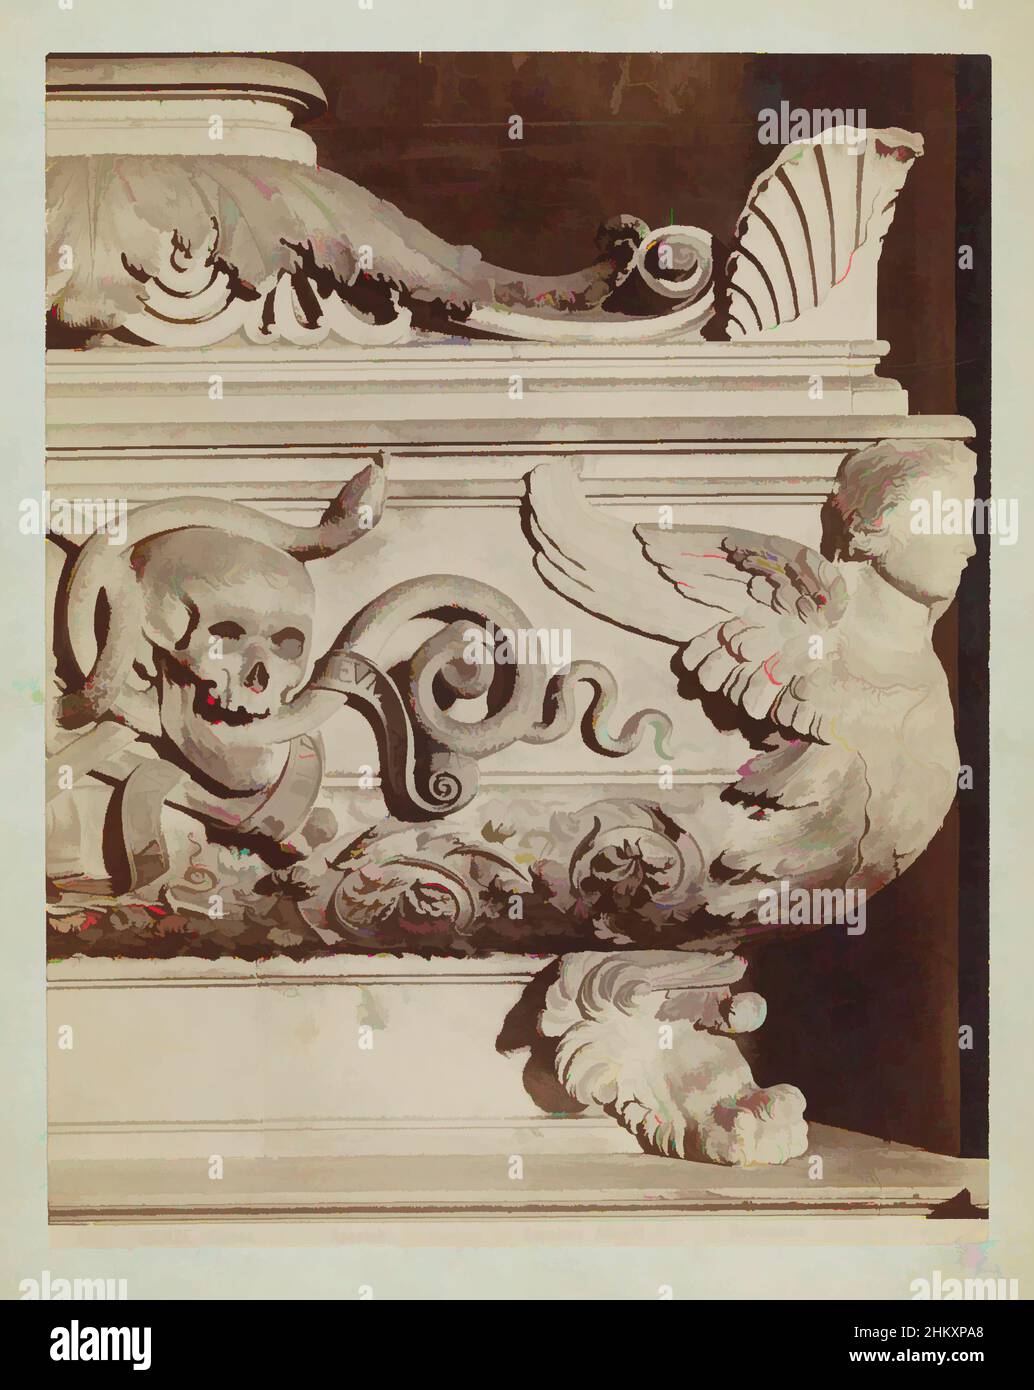 Art inspired by Part of the tomb of Alfonso Altoviti in the Santi Apostoli in Florence, FIRENZE (Chiesa dei SS. Apostoli) Particolare del Sepolcro Altoviti di B. da Rovezzano., Edizione Brogi, Florence, c. 1875 - c. 1900, cardboard, albumen print, height 250 mm × width 192 mm, Classic works modernized by Artotop with a splash of modernity. Shapes, color and value, eye-catching visual impact on art. Emotions through freedom of artworks in a contemporary way. A timeless message pursuing a wildly creative new direction. Artists turning to the digital medium and creating the Artotop NFT Stock Photo